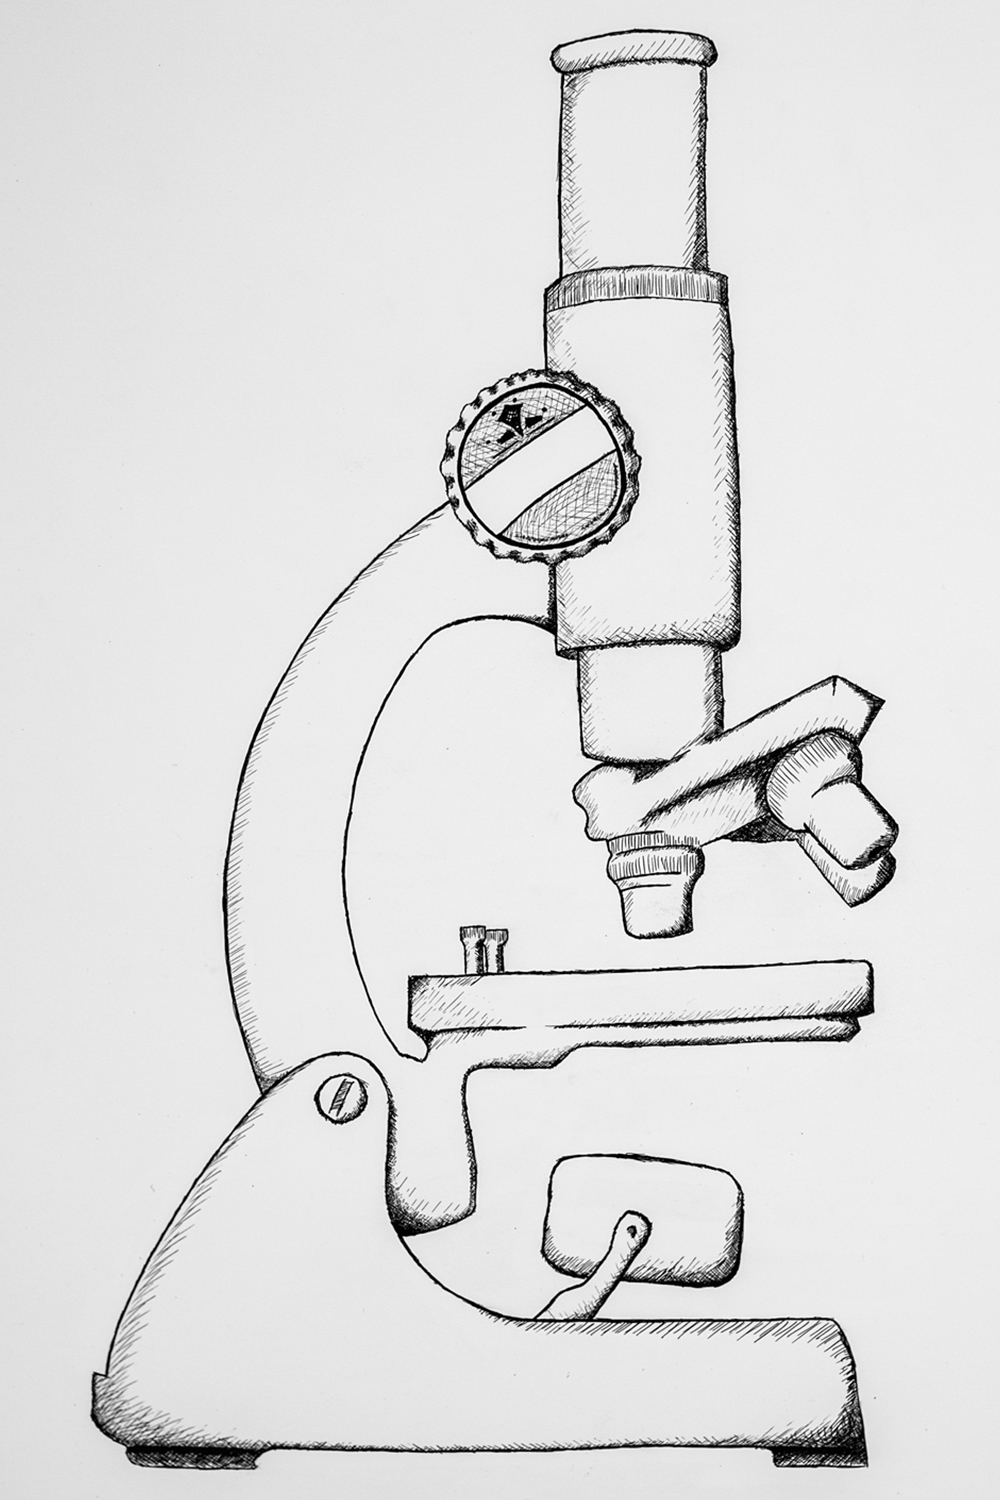 Crowquill illustration of a microscope with a beer bottle cap for its main adjustment dial.